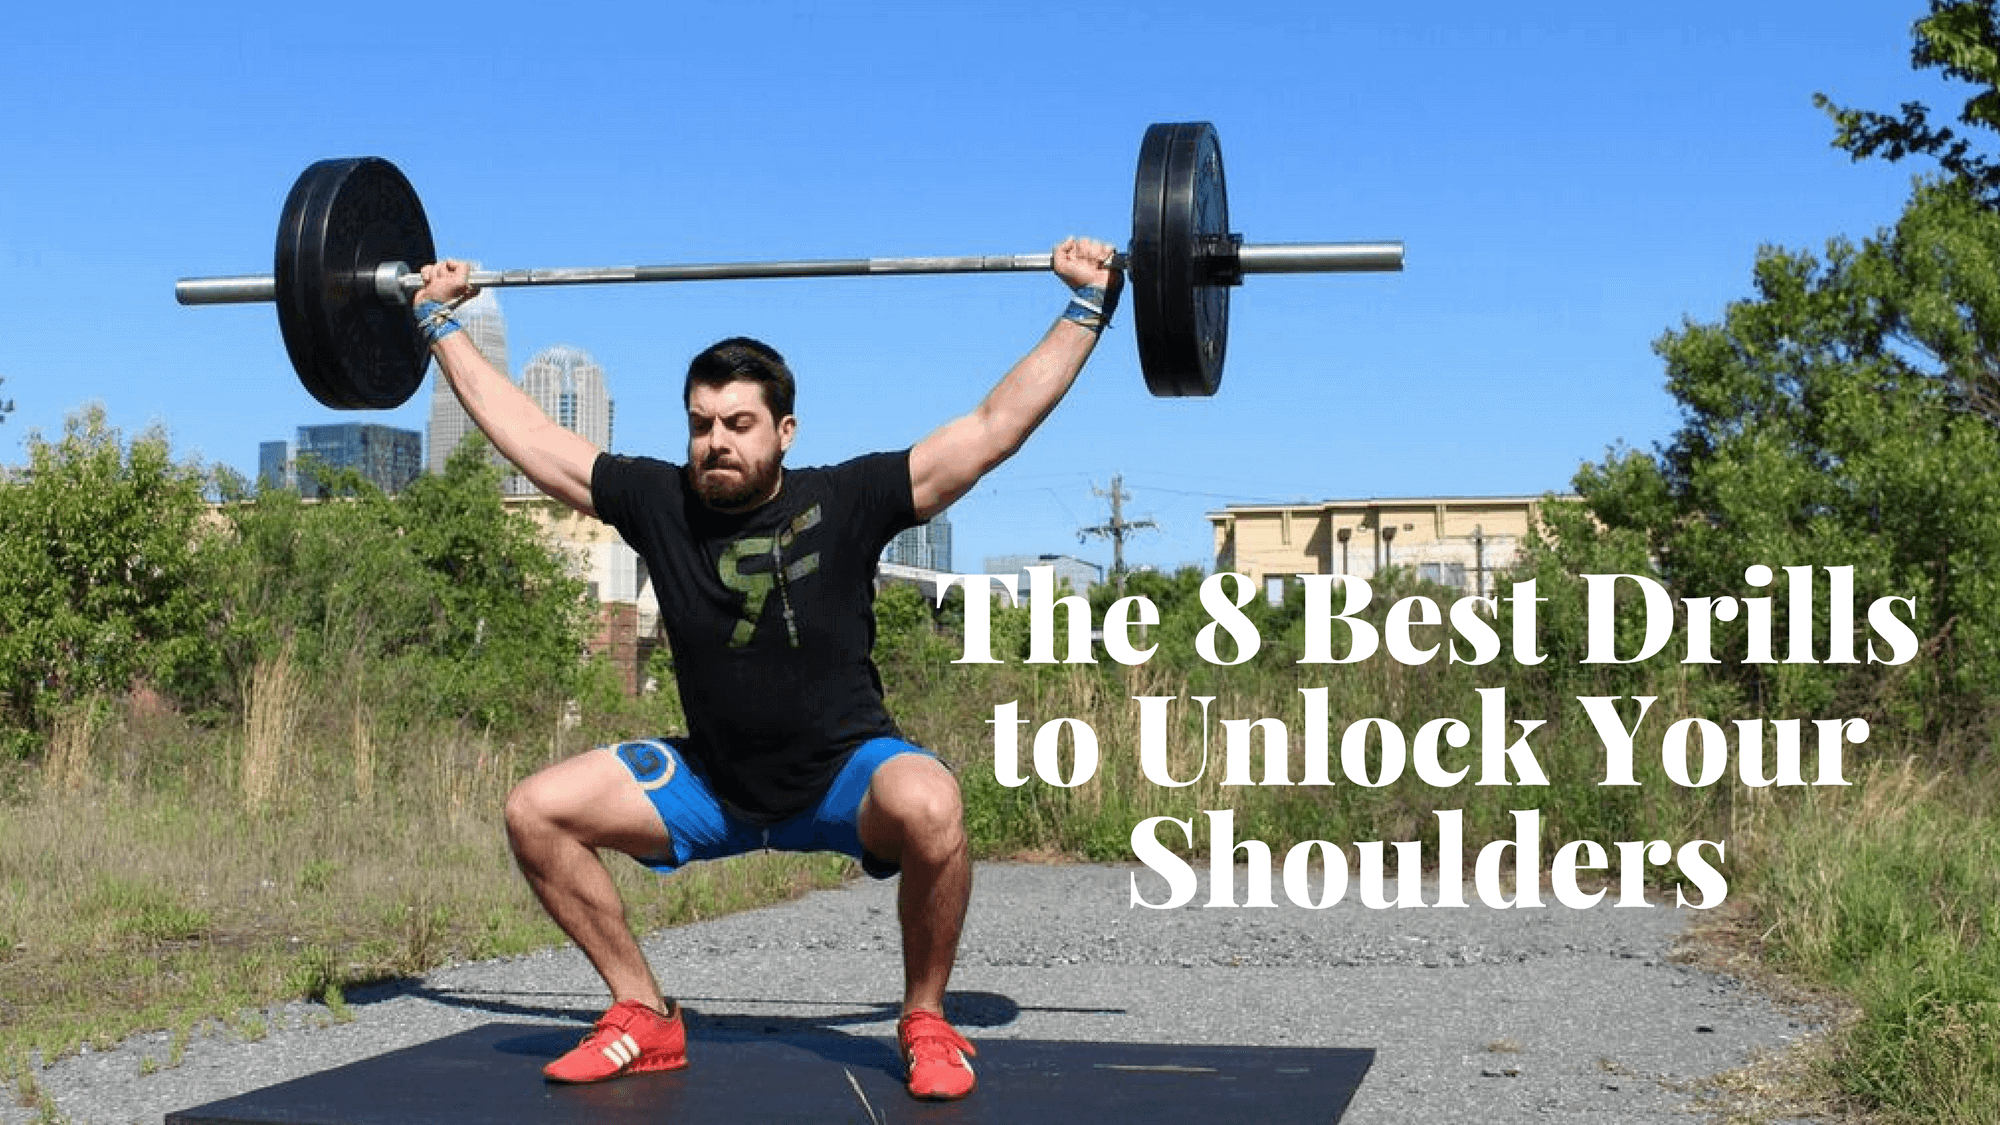 The 8 Best Drills to Unlock Your Shoulder Mobility